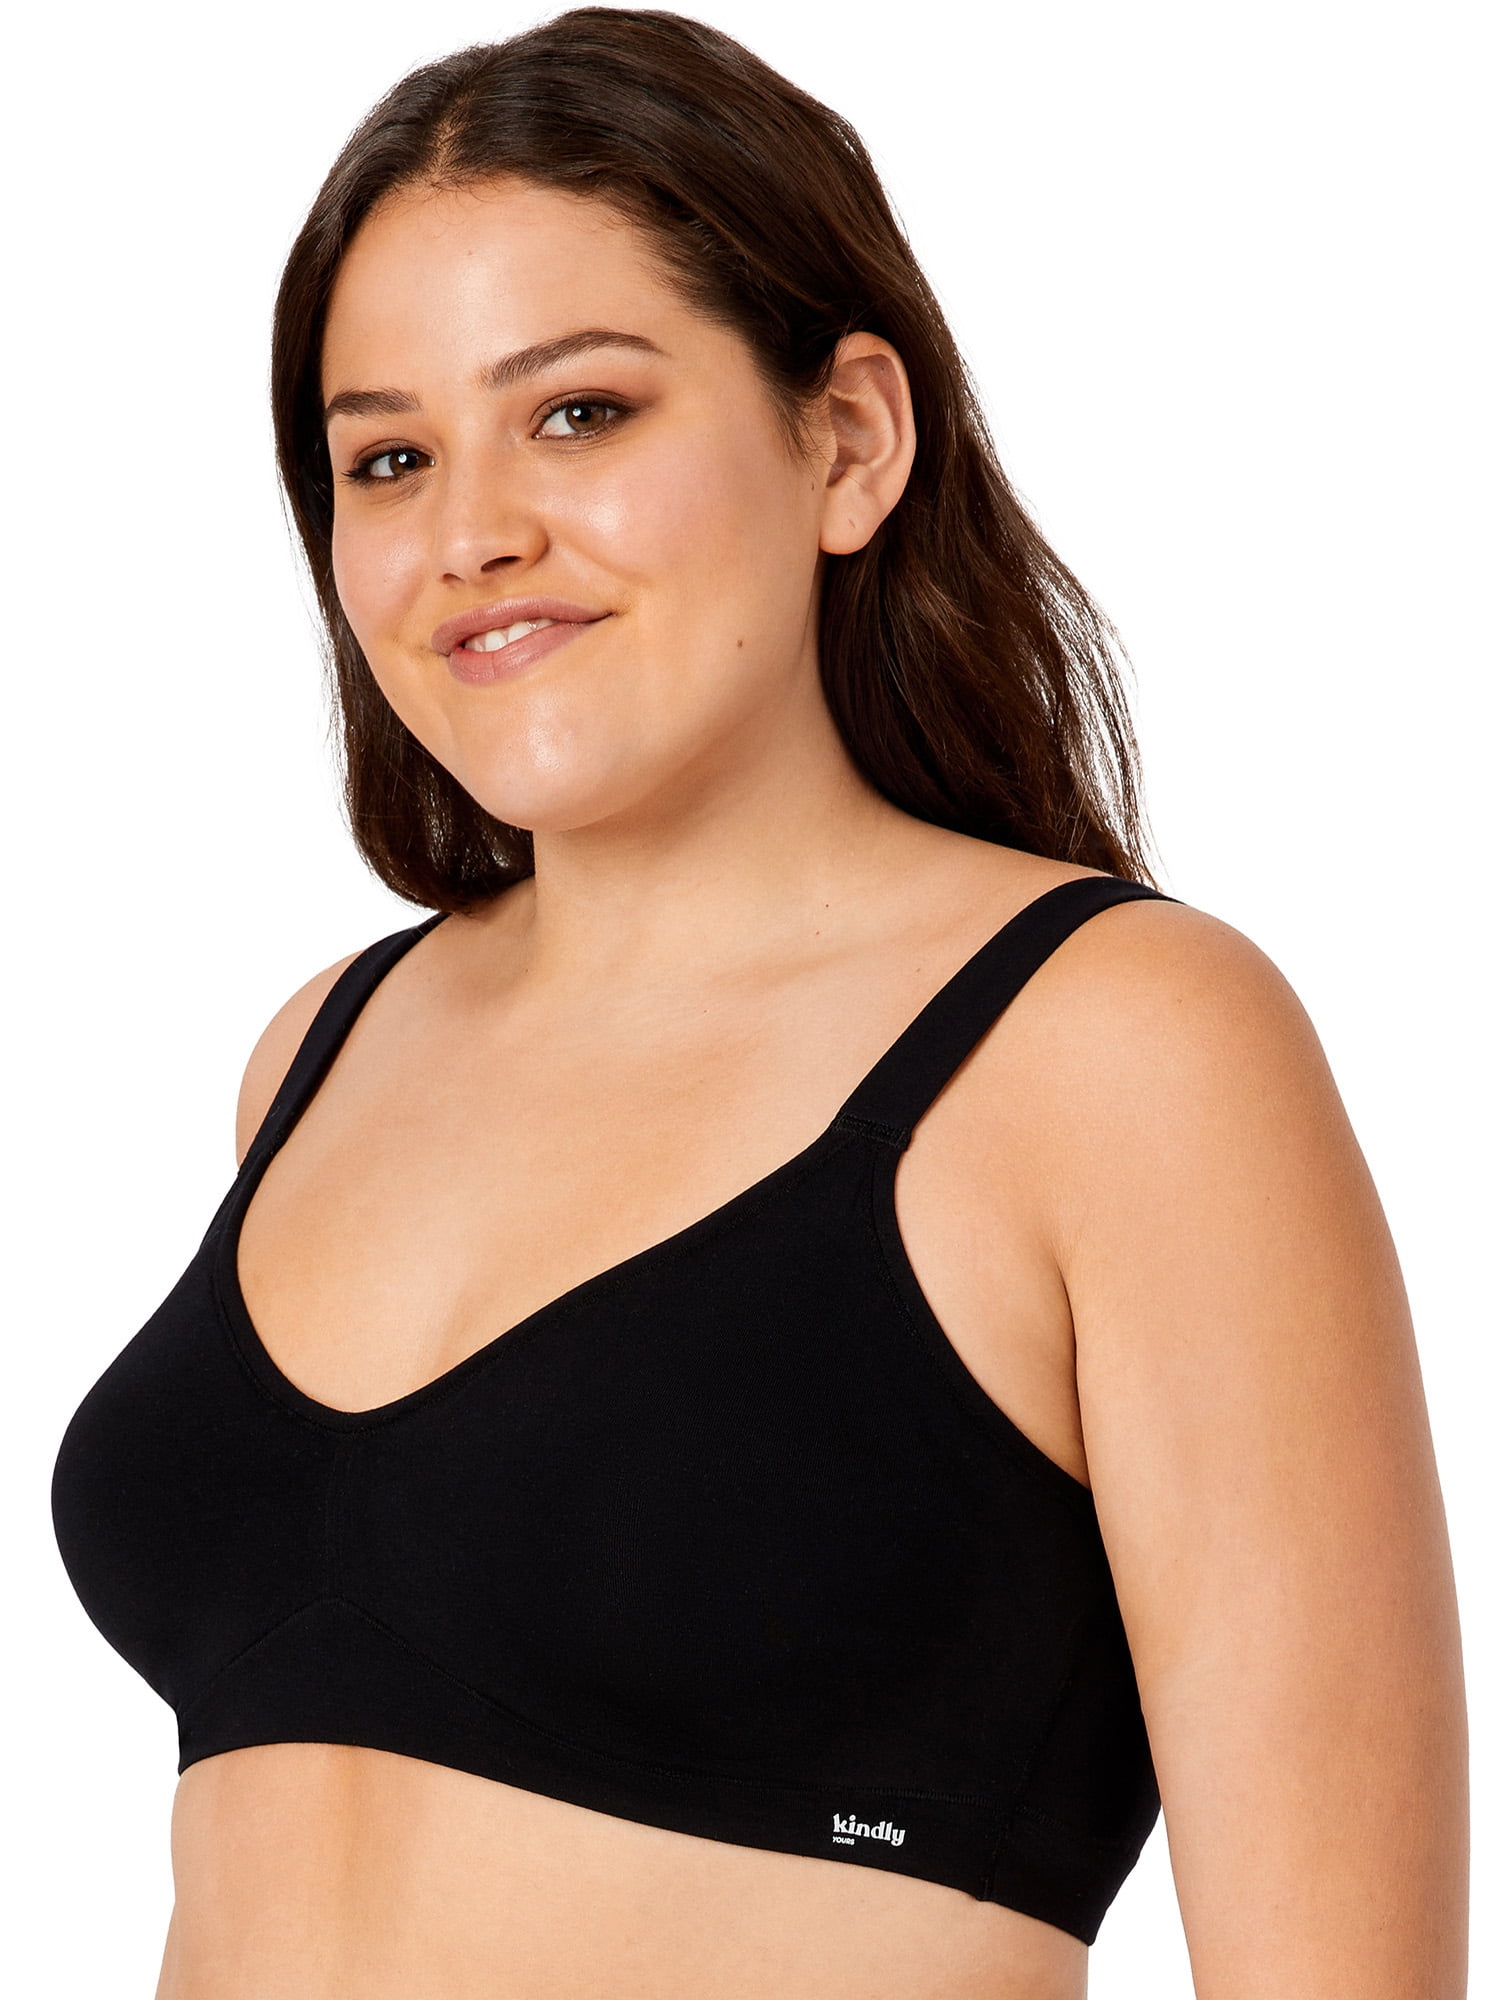 Kindly Yours Women\'s Comfort Modal Lounge Pullover Bra, Sizes S to XXXL